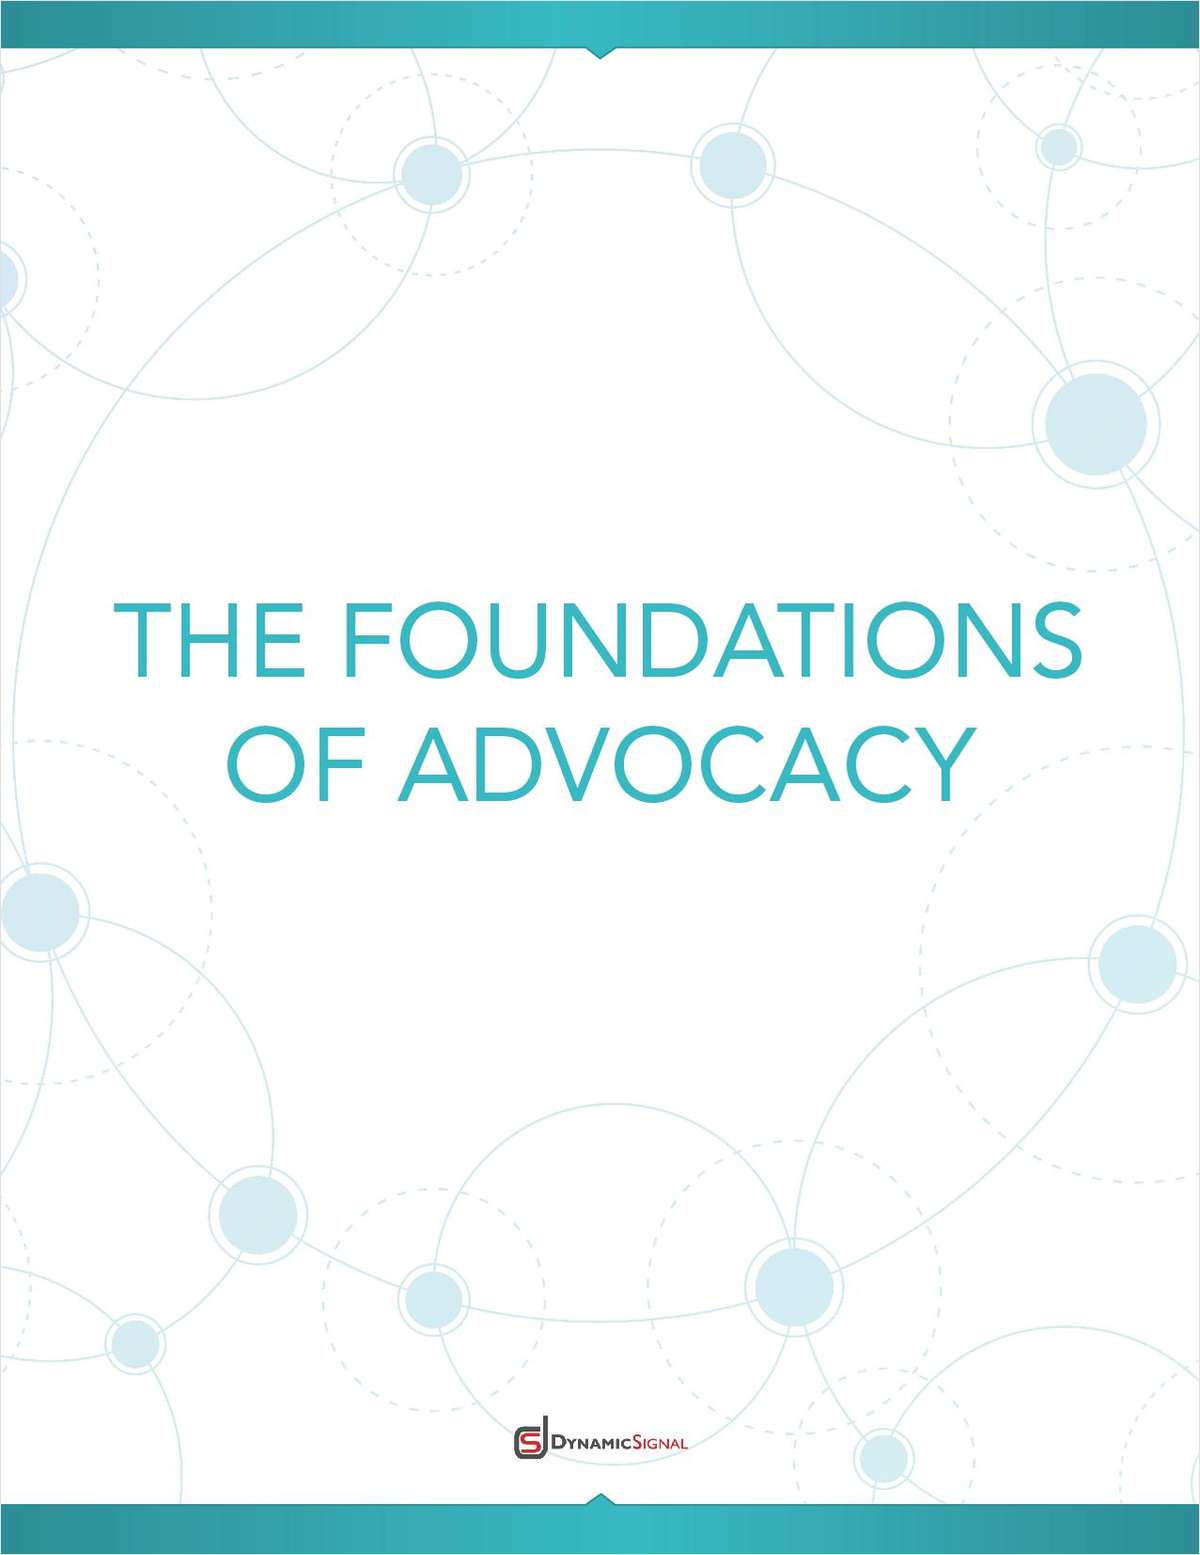 The Foundations of Advocacy Marketing